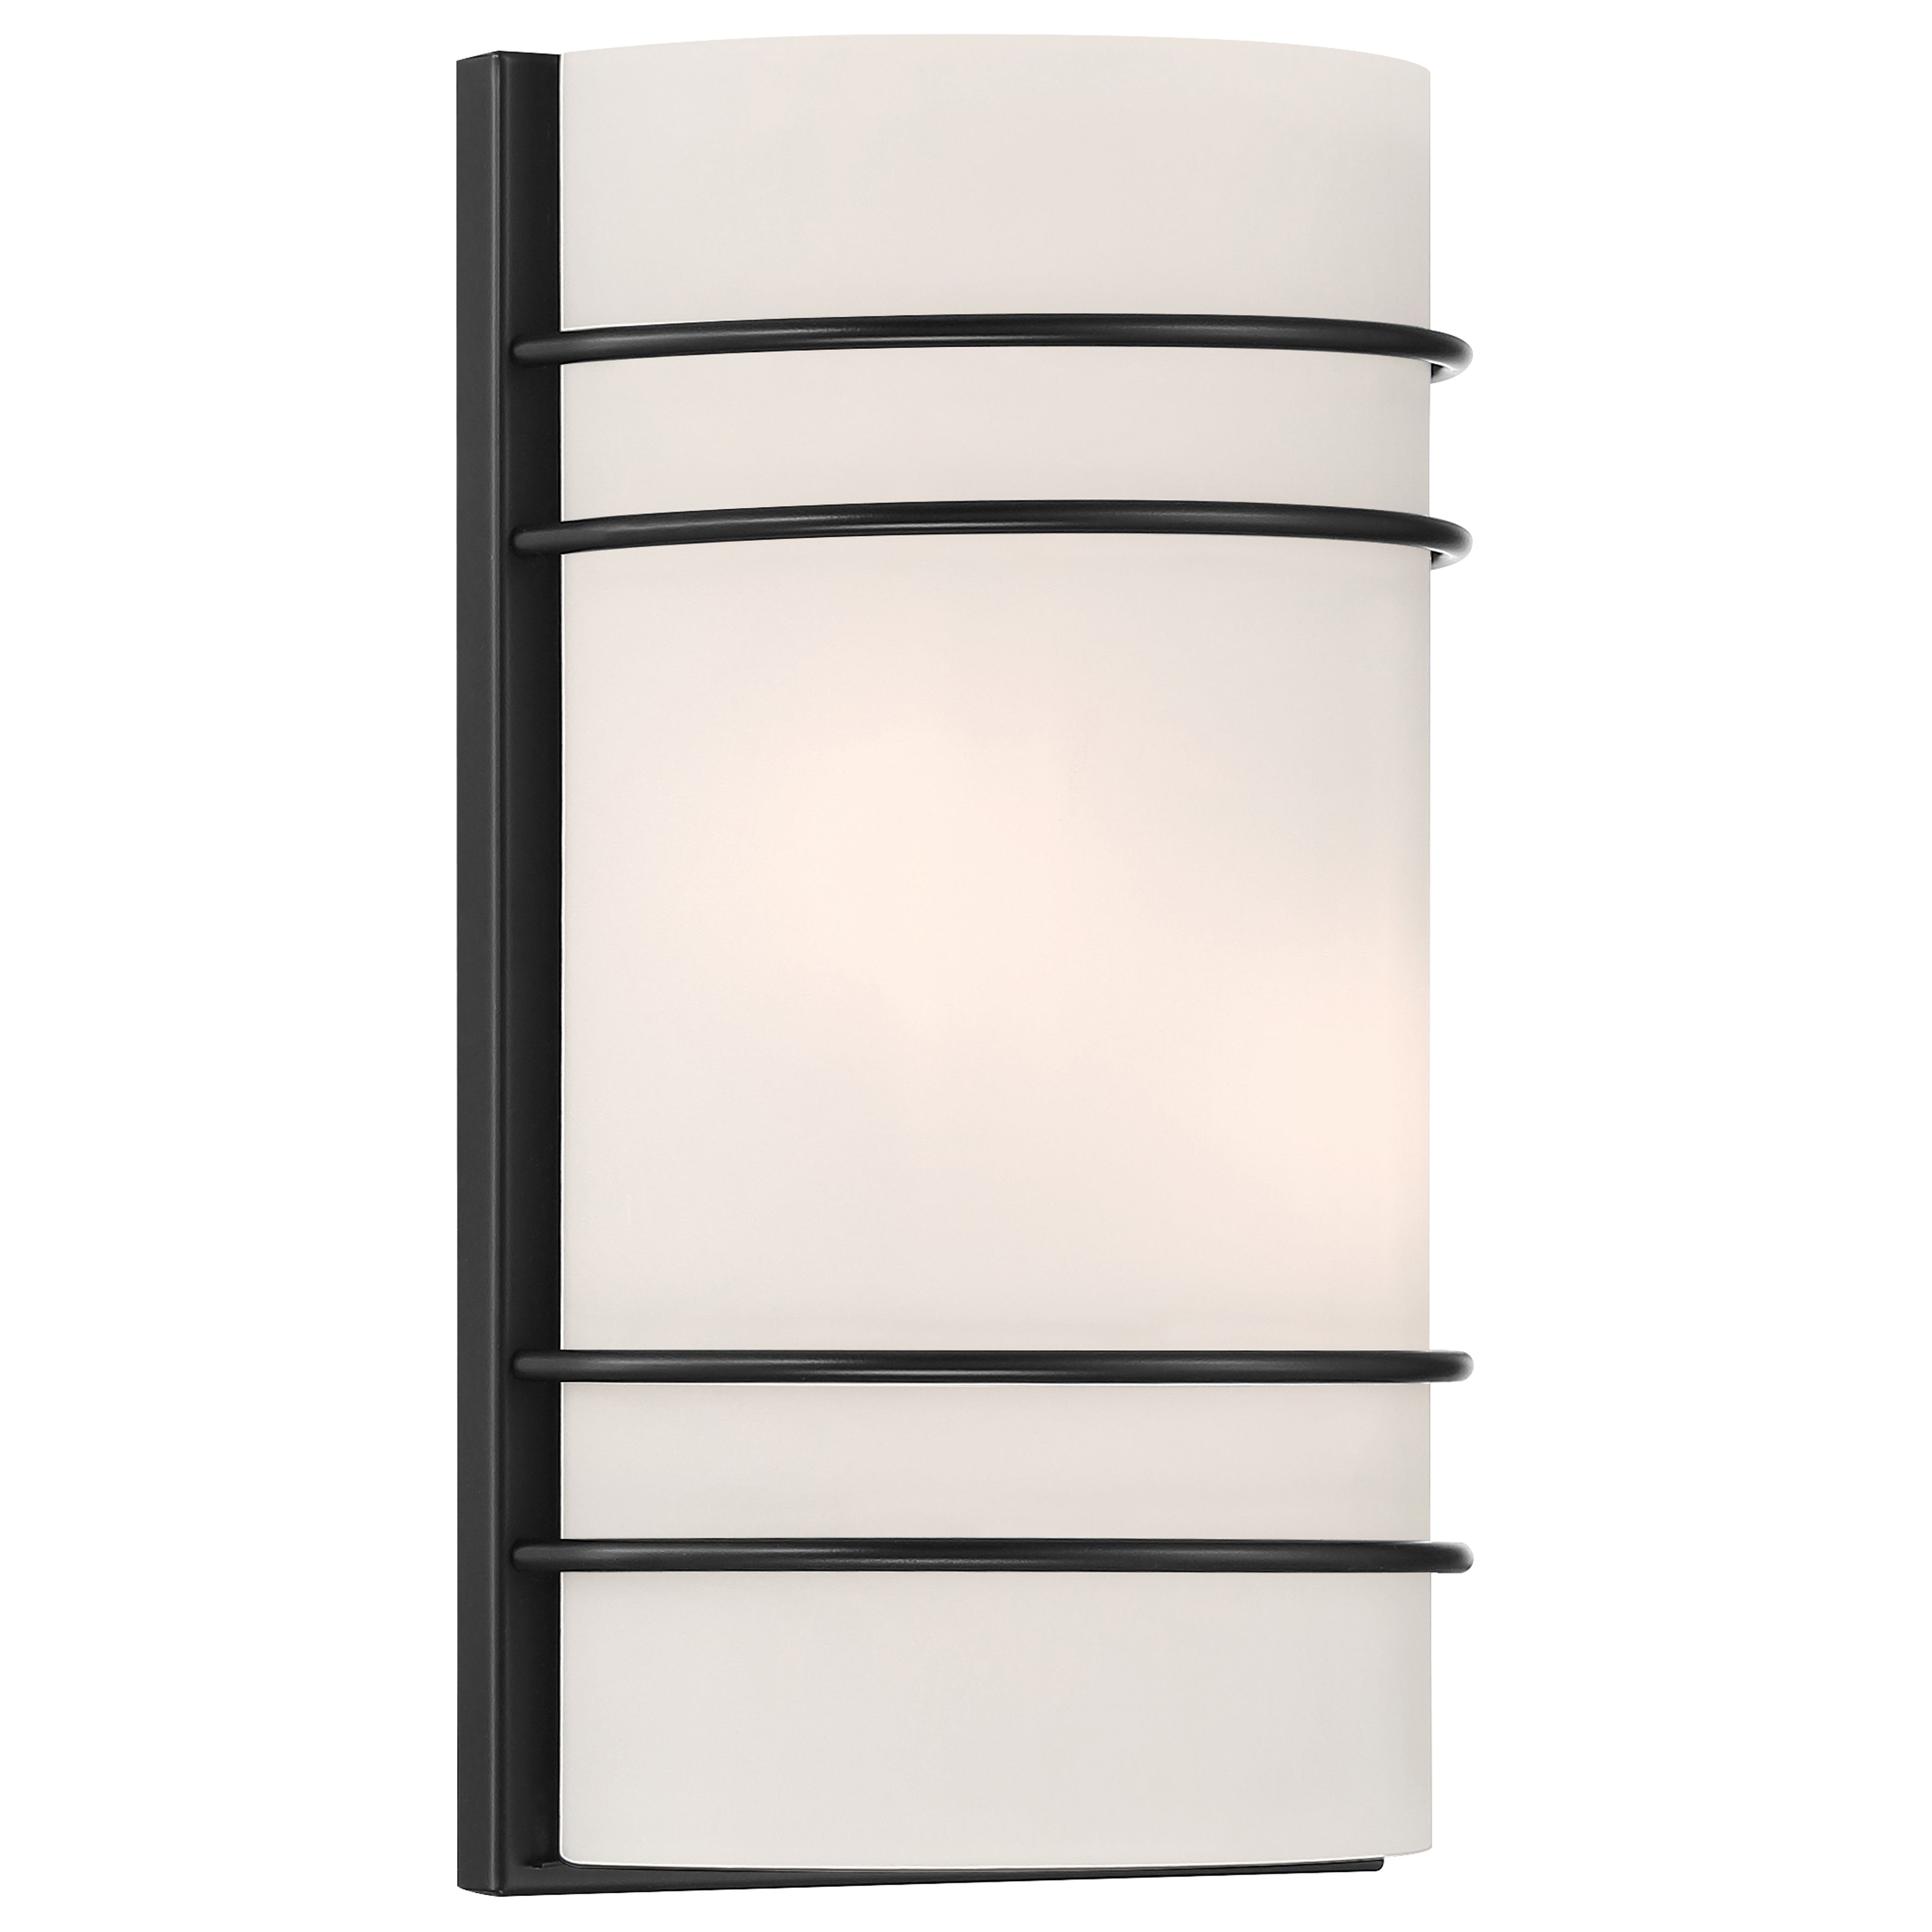 Access Lighting Cassi 2 Light LED Wall Sconce